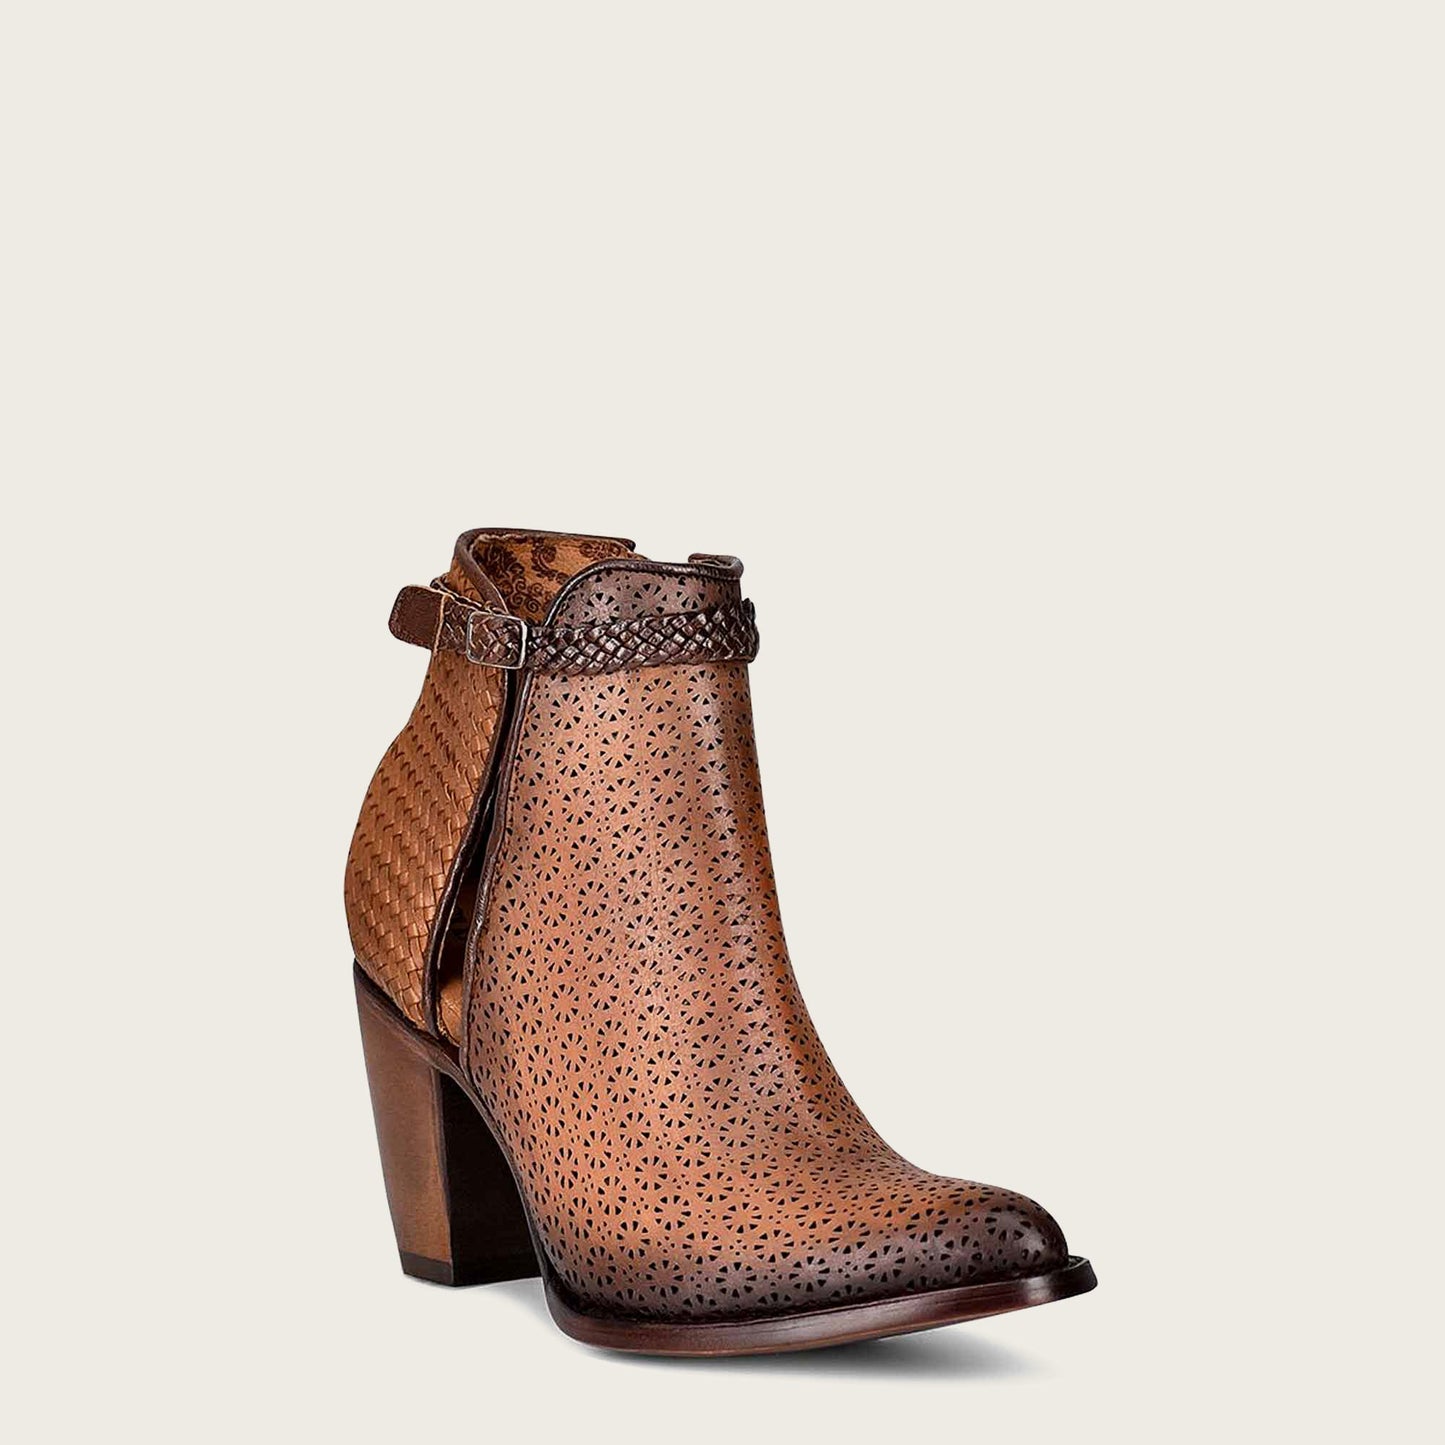 Step up your style game with these chic brown leather booties featuring intricate perforated details and a hand braided ankle strap.